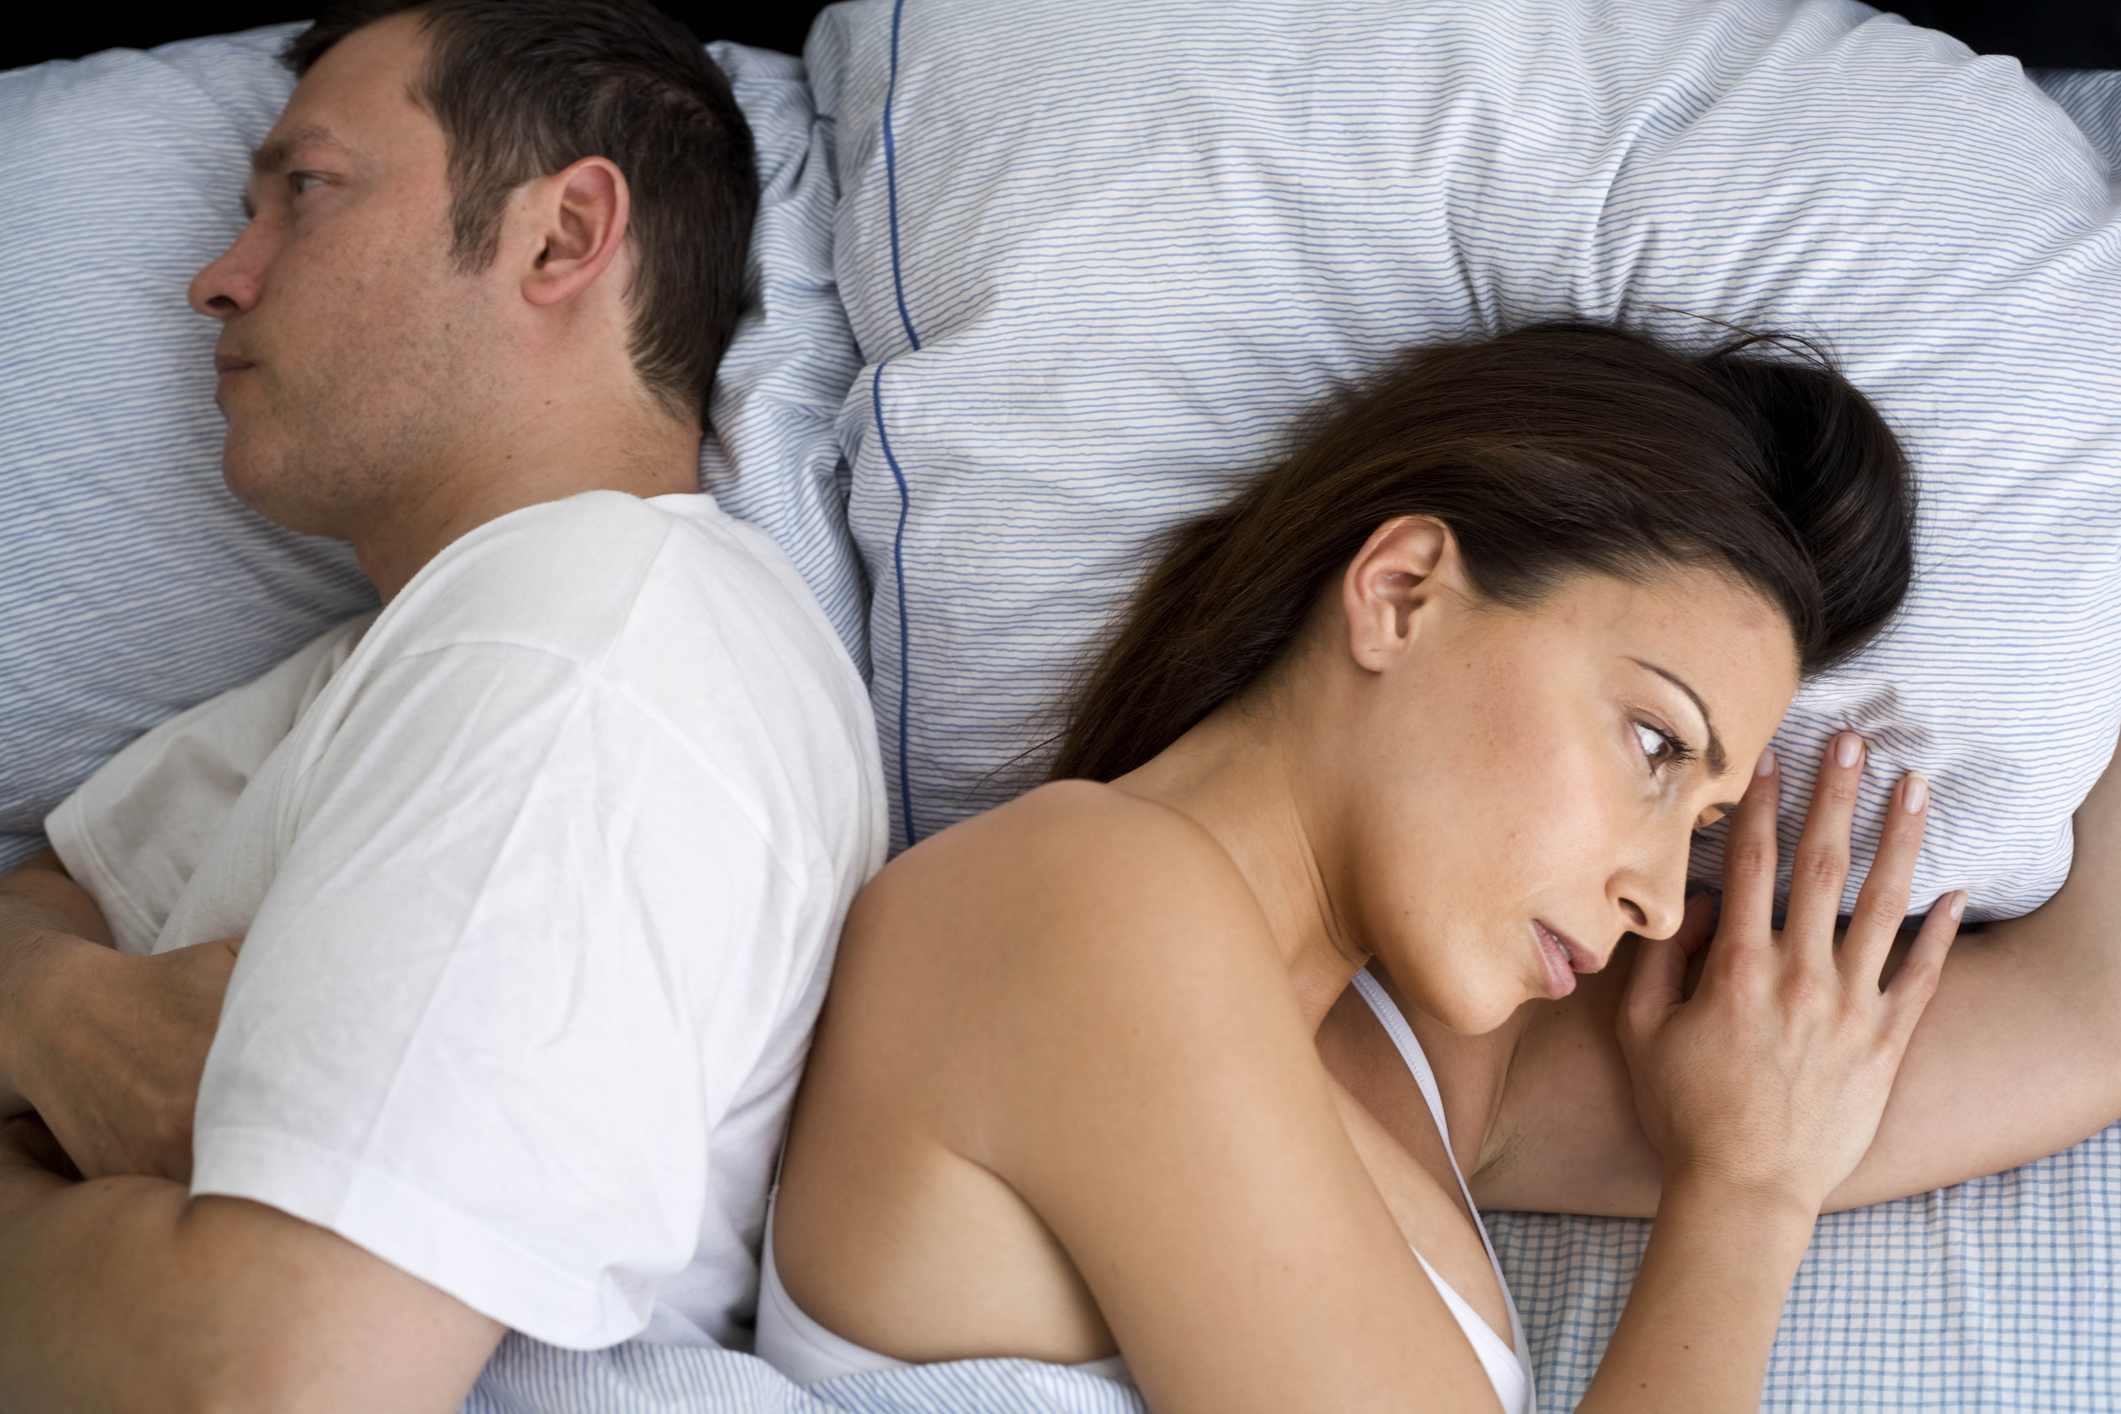 Stuck in a sexless relationship? What it could mean and how to fix it